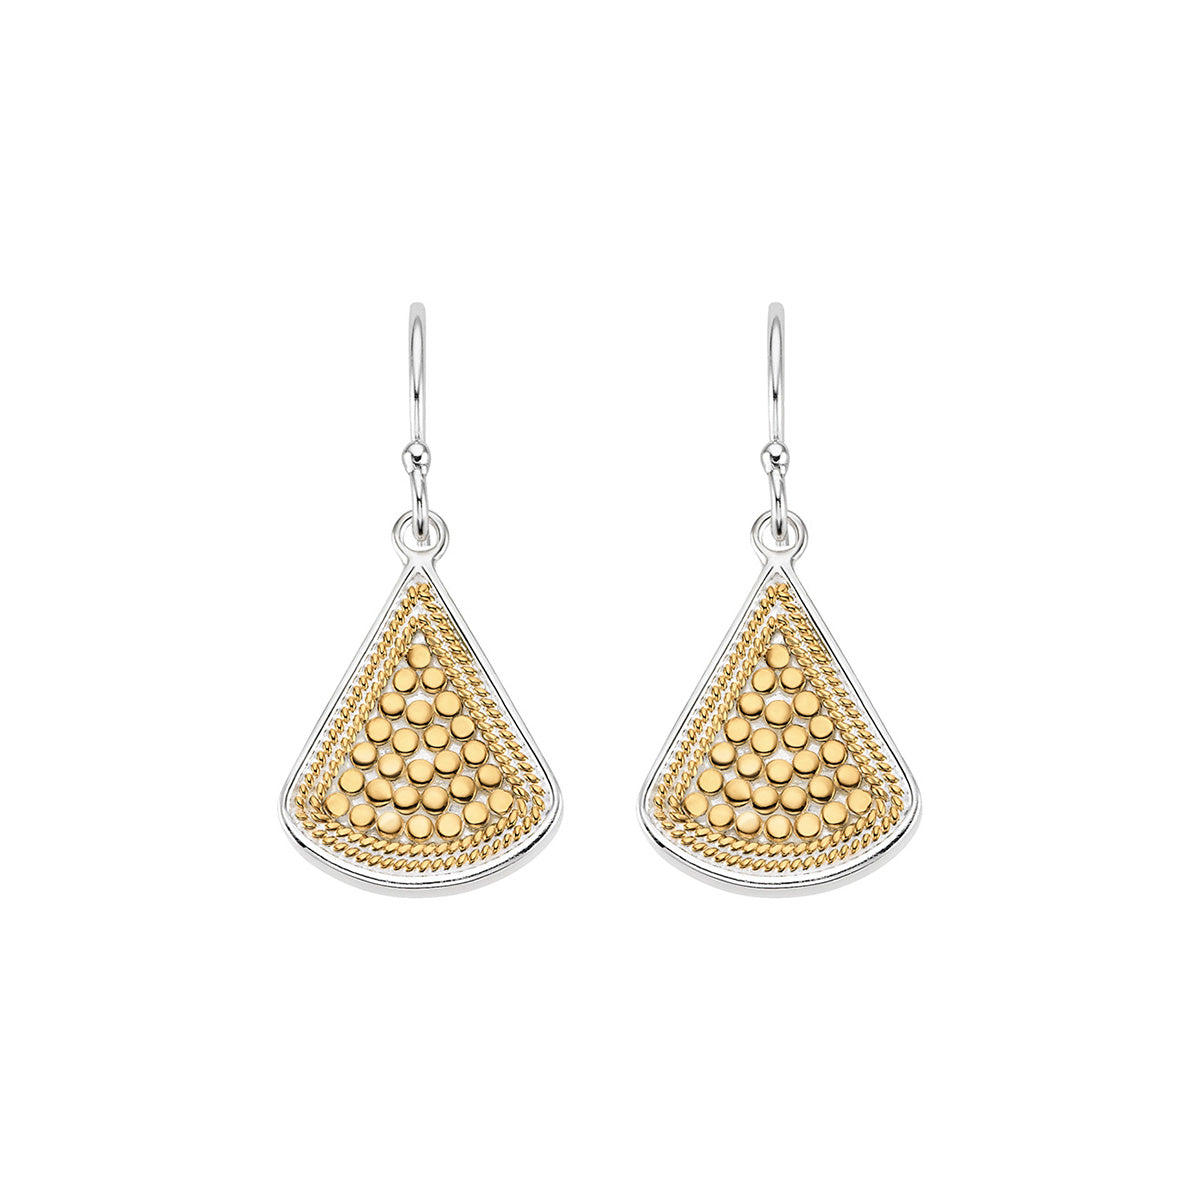 Ana Beck 18k gold plated and sterling silver Triangle Drop Earrings - Gold